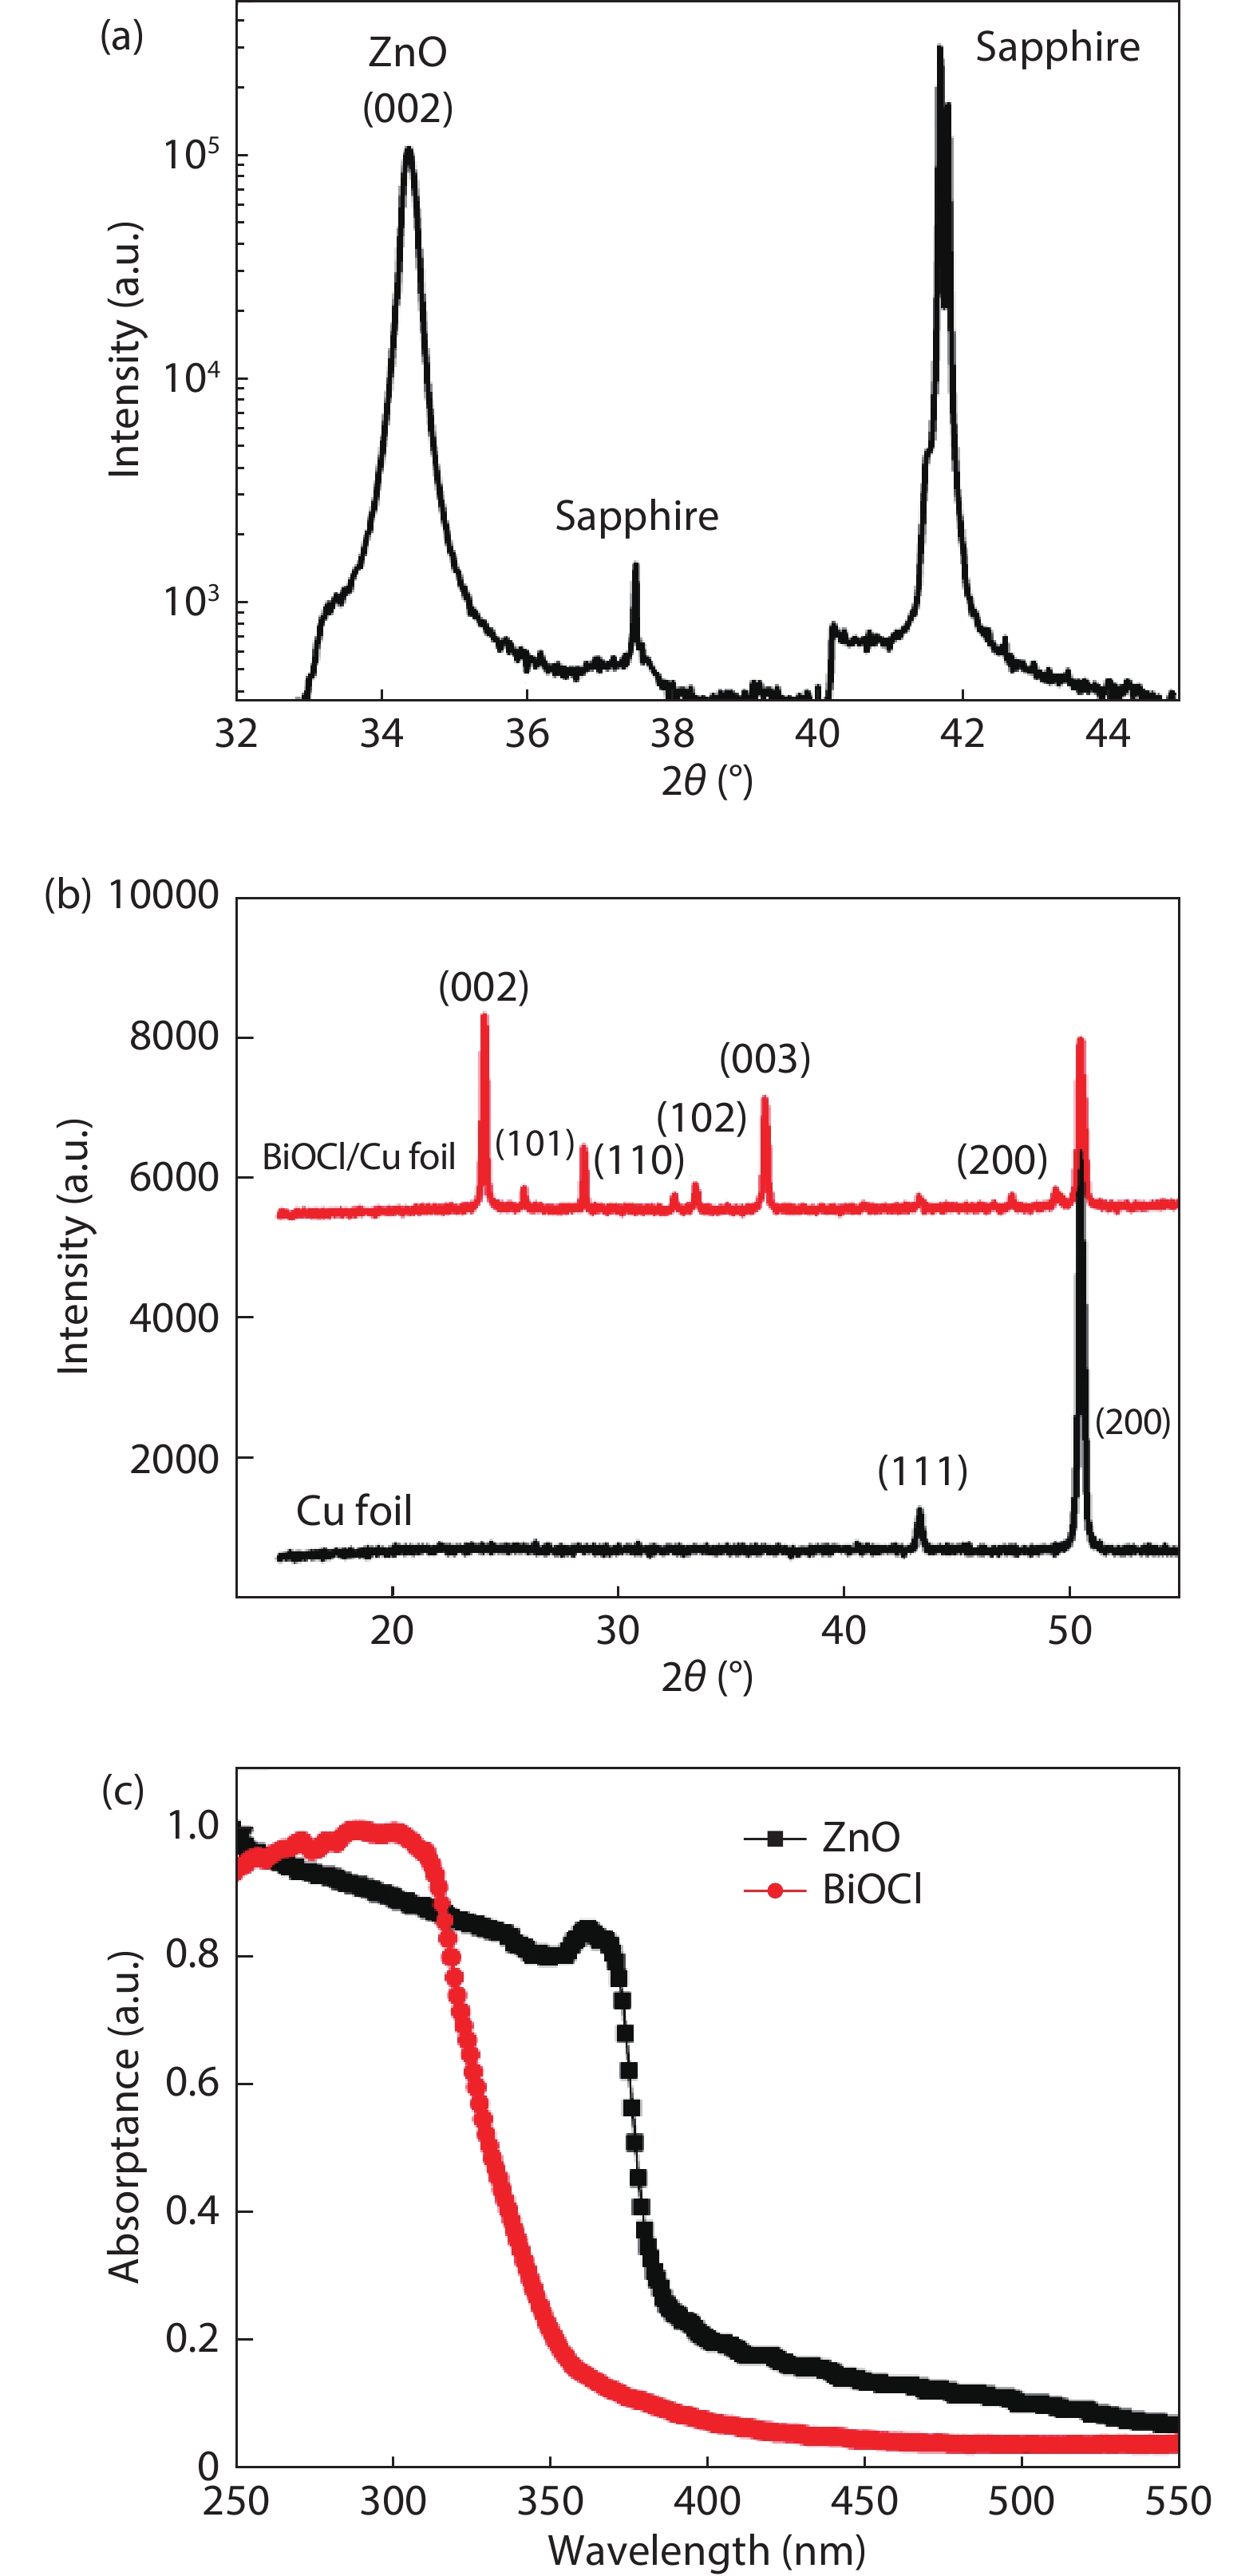 (Color online) (a) XRD pattern of ZnO thin film. (b) XRD patterns of BiOCl on Cu foil substrate and Cu foil. (c) Optical absorption spectra of BiOCl nanoflakes and ZnO thin film.